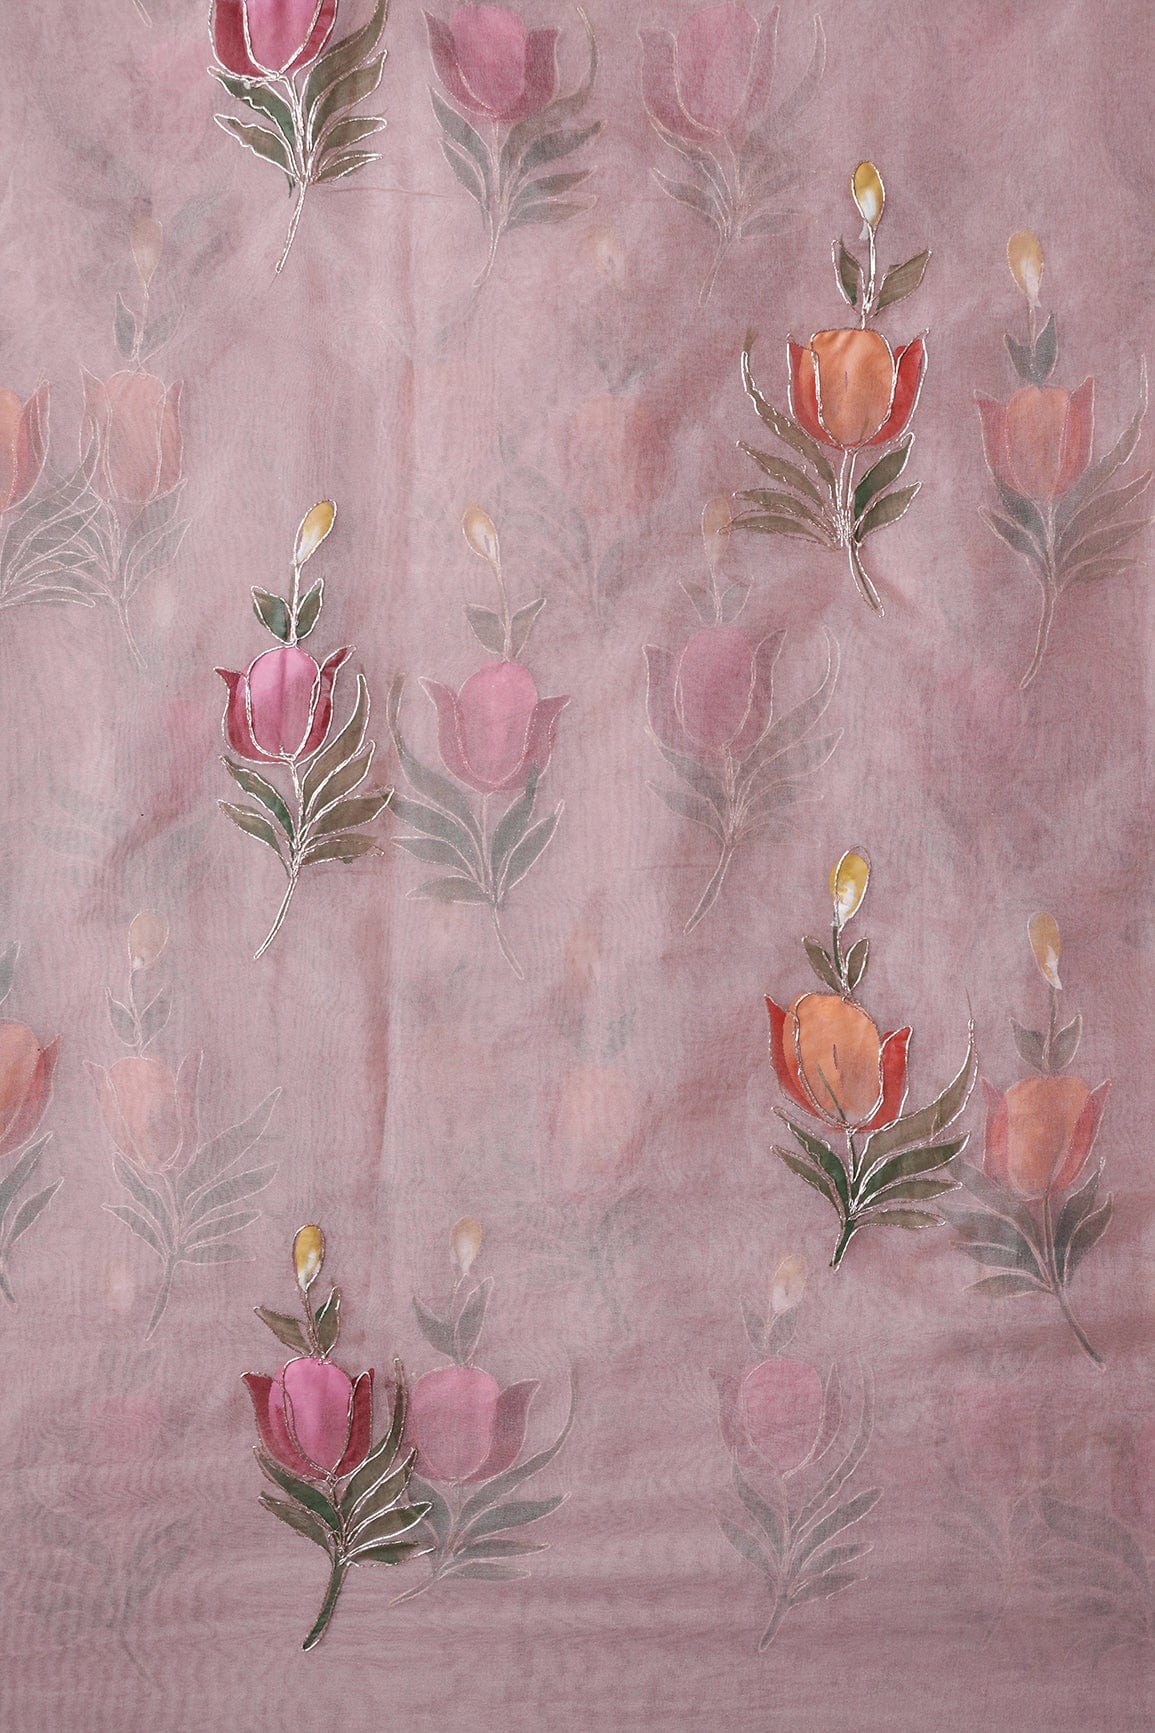 doeraa Prints Beautiful Floral Hand Painted With Embroidery Work On Mauve Organza Fabric